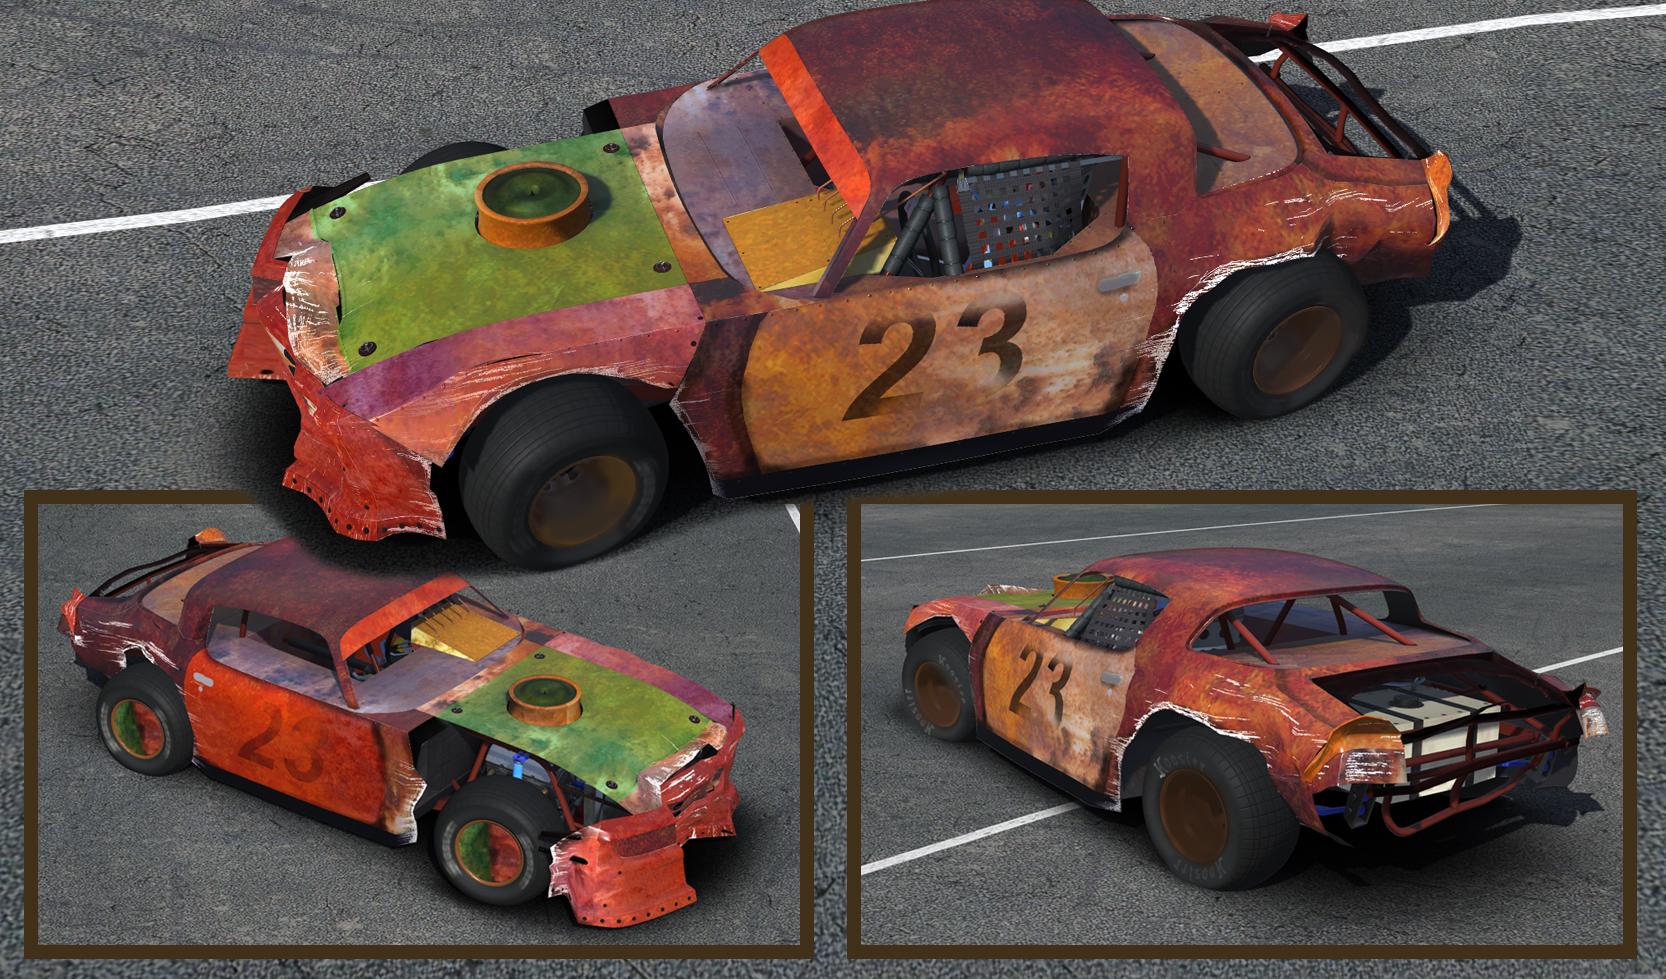 Preview of Street Stock Dirt Rust Bucket by Clyde Coman